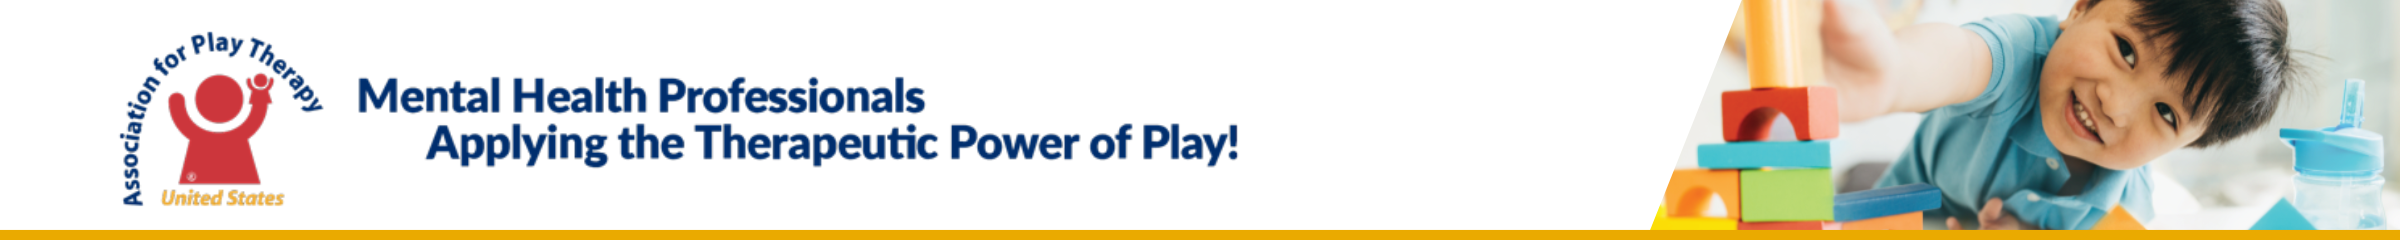 Association for Play Therapy logo